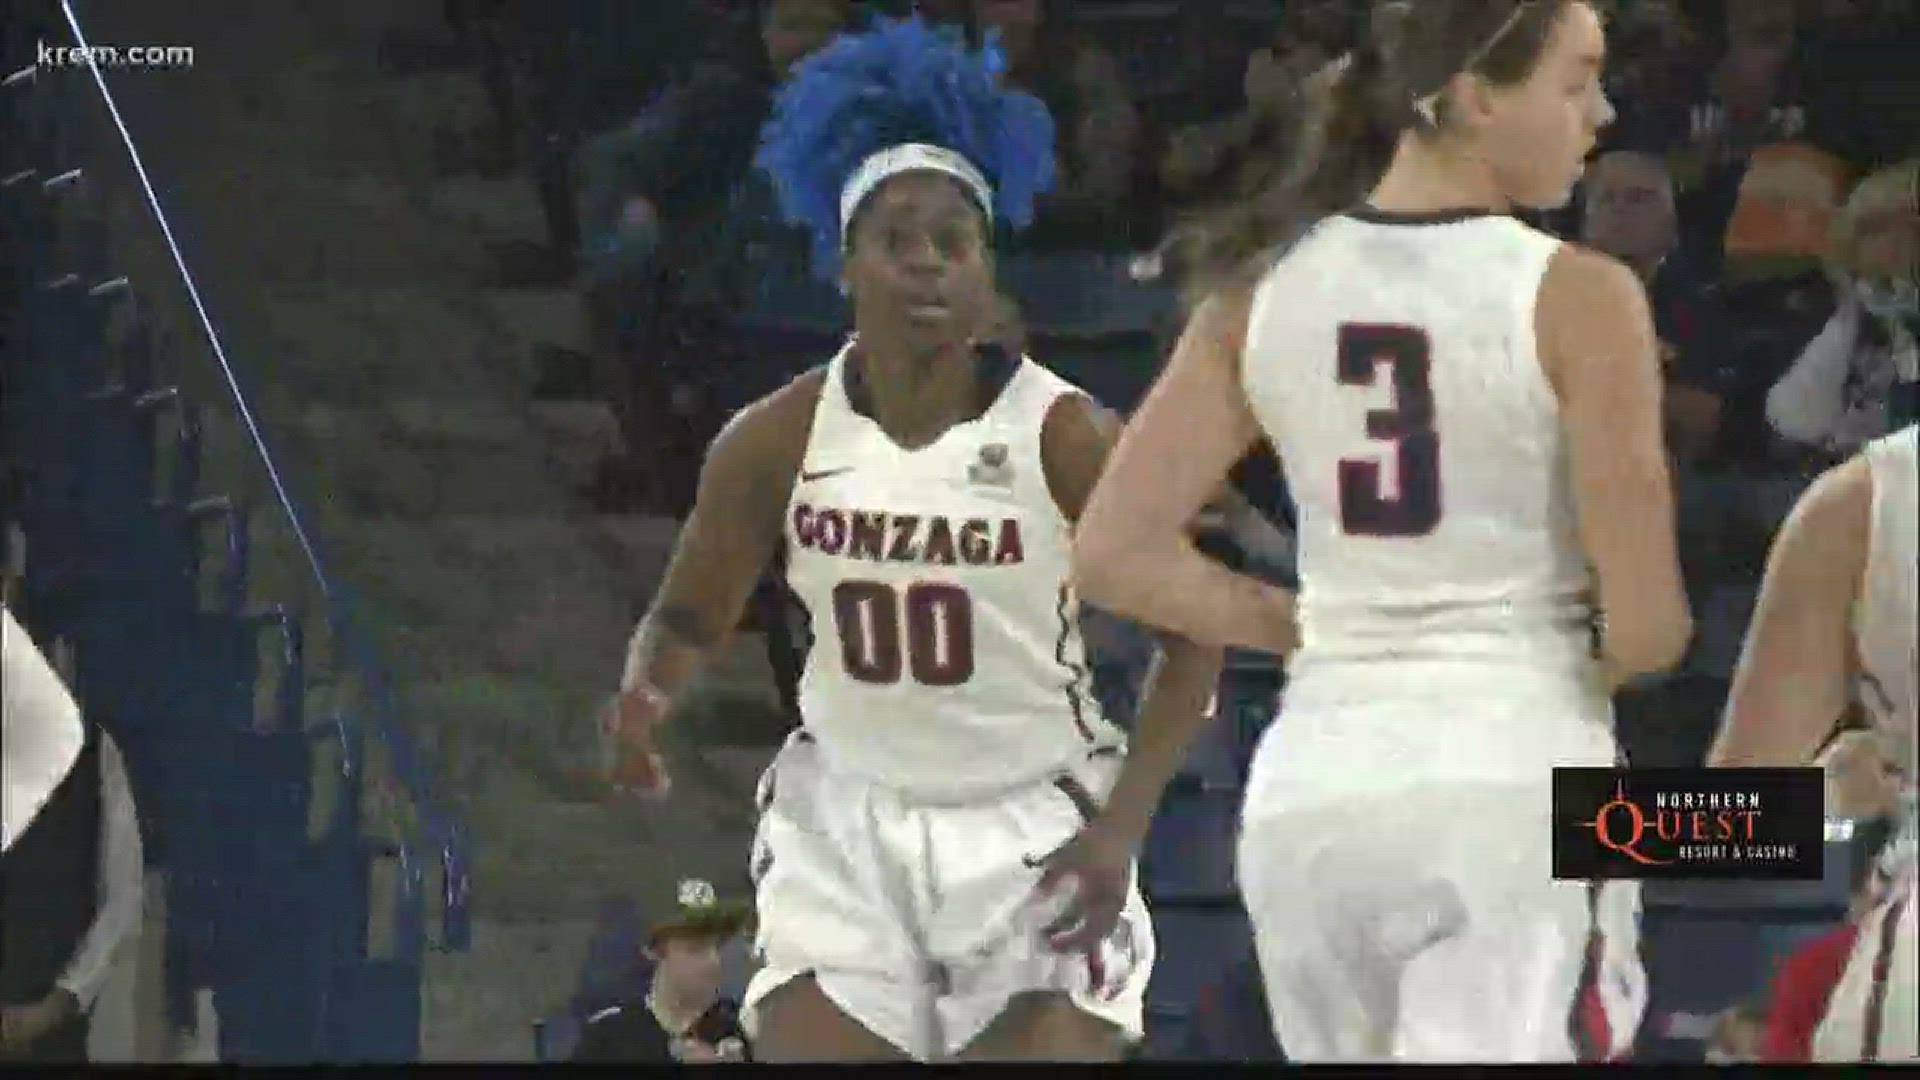 Jill Barta returned to action as Gonzaga gets the 97-74 win against Saint Francis.